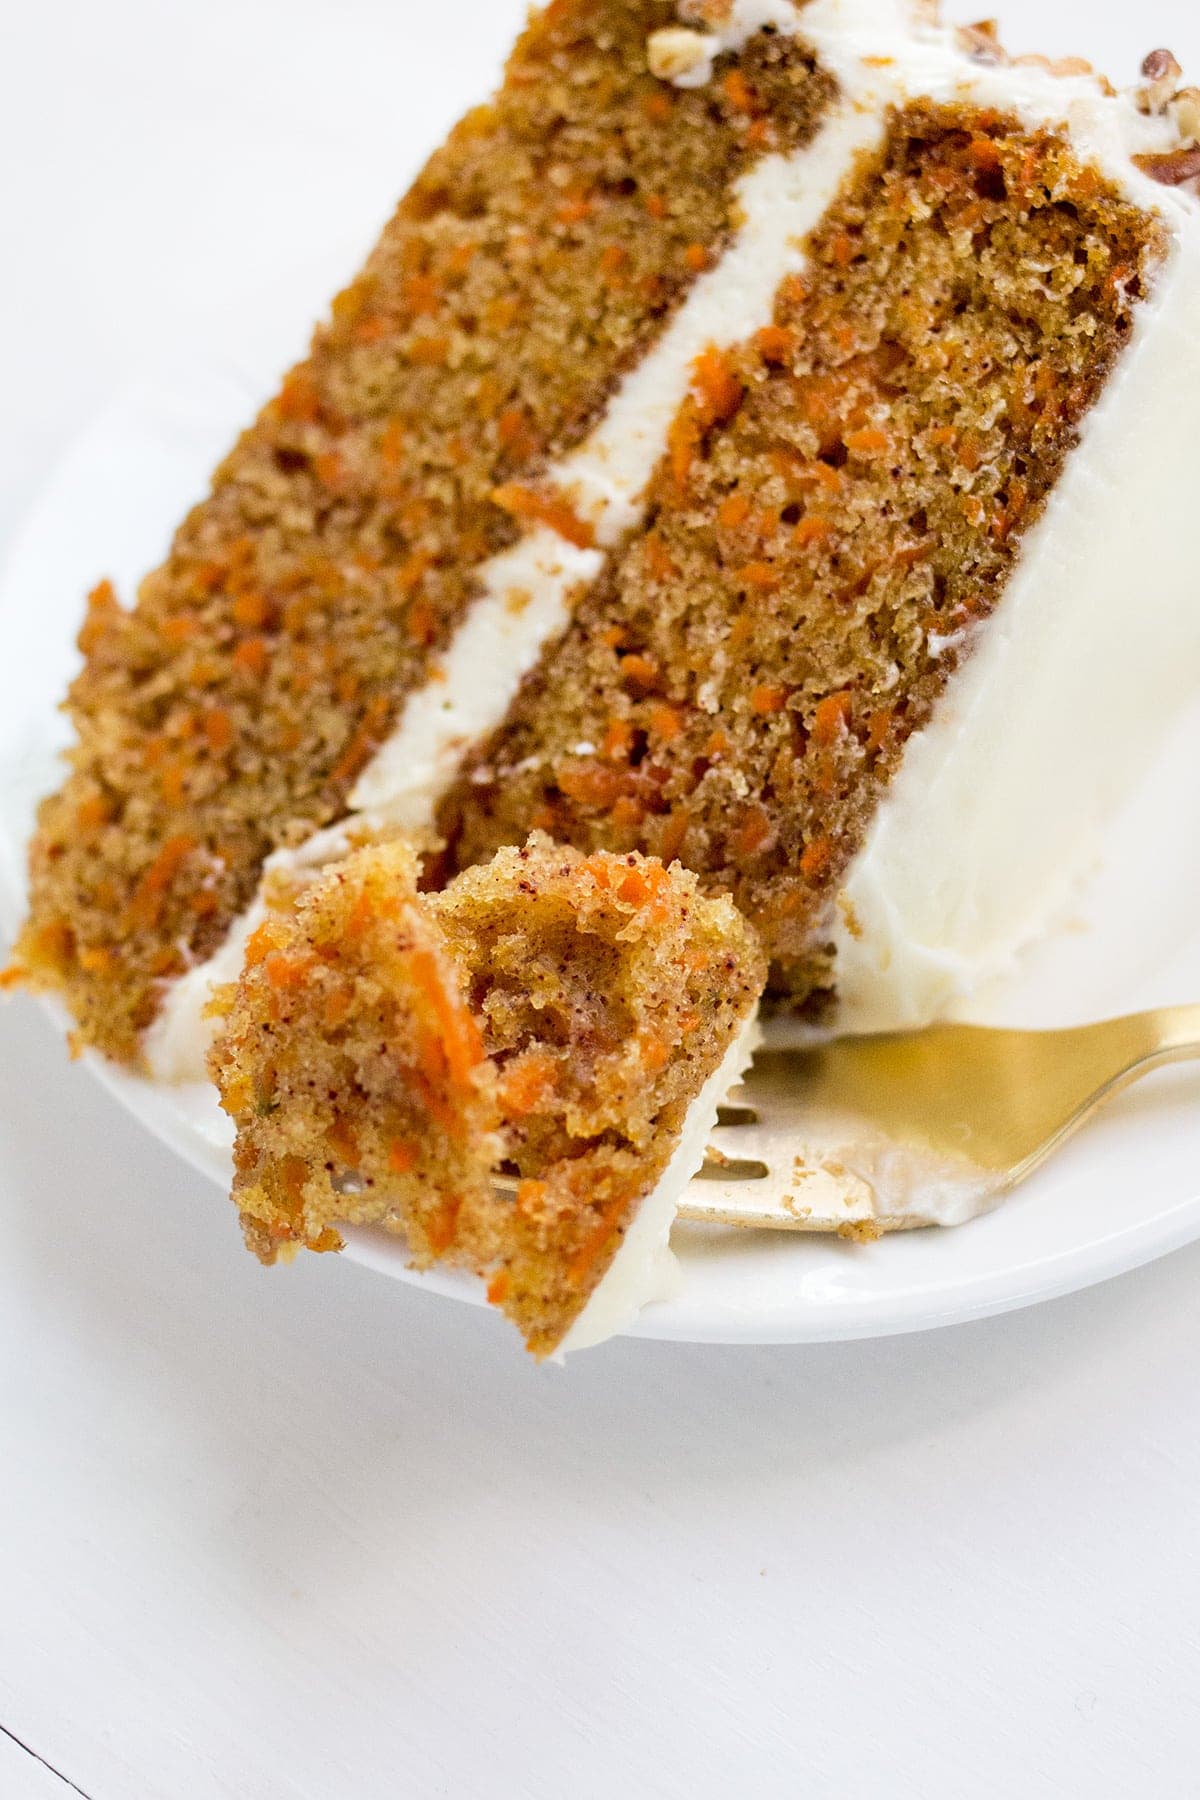 https://www.freutcake.com/wp-content/uploads/2020/02/The-Very-Best-Carrot-Cake-With-Cream-Cheese-Frosting-7.jpg